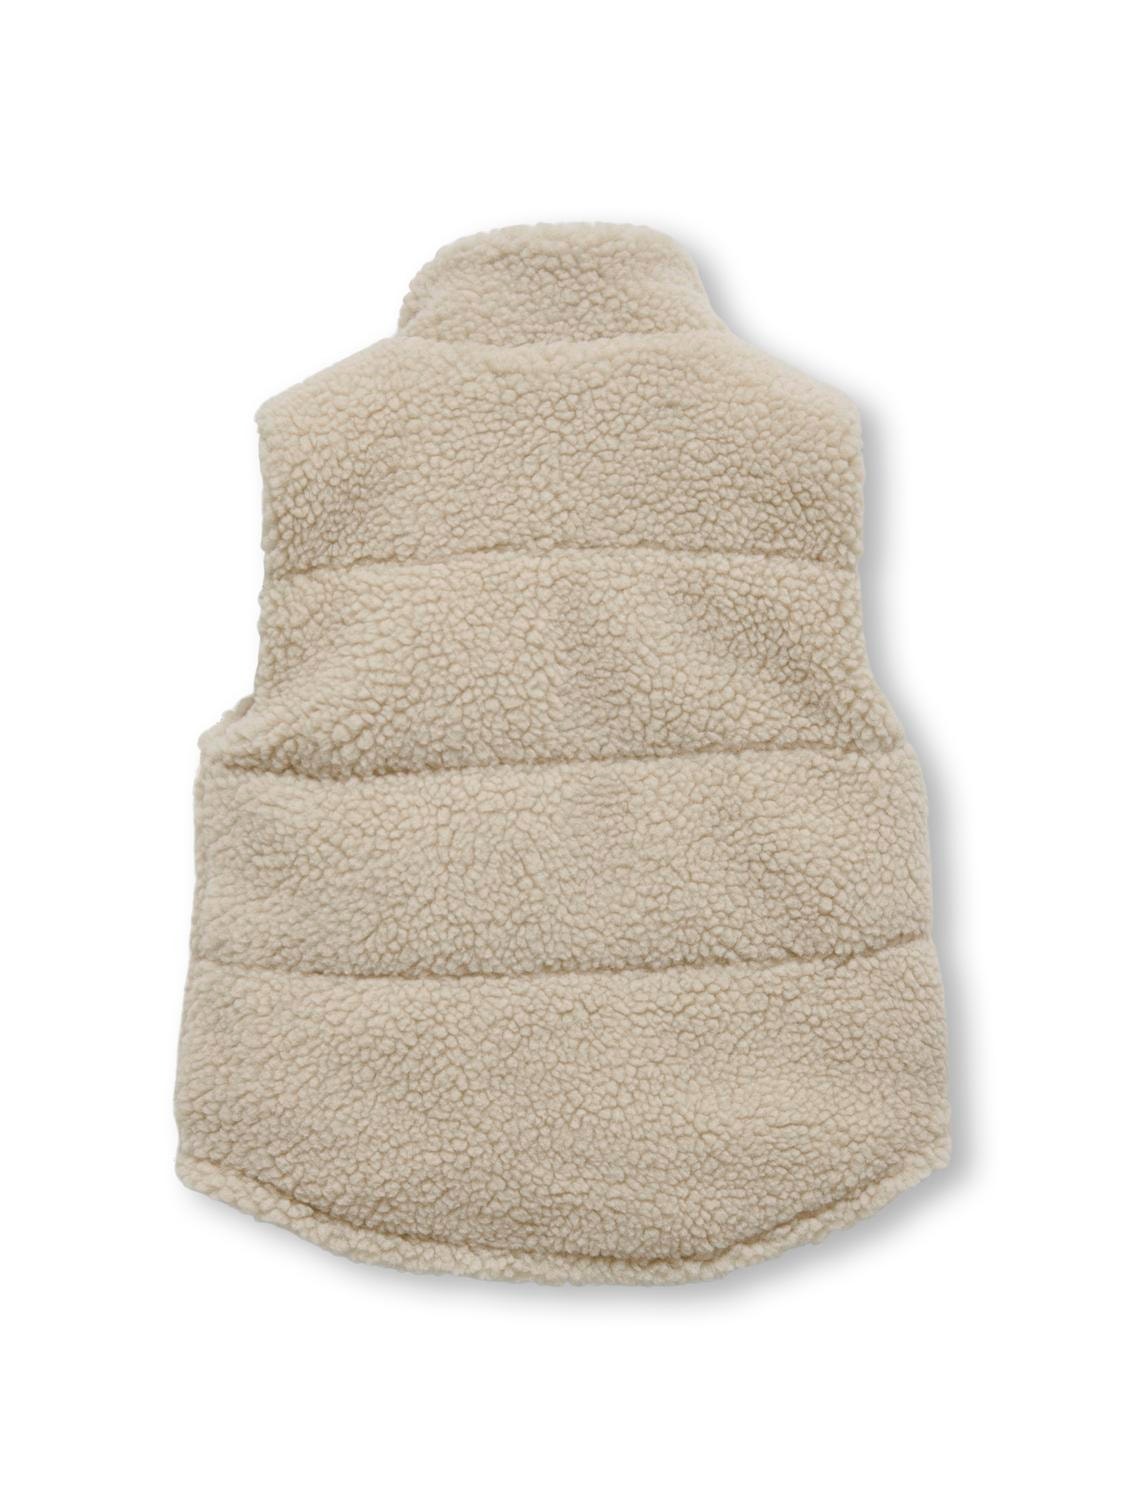 ONLY Gilets anti-froid Col haut -Pumice Stone - 15302542